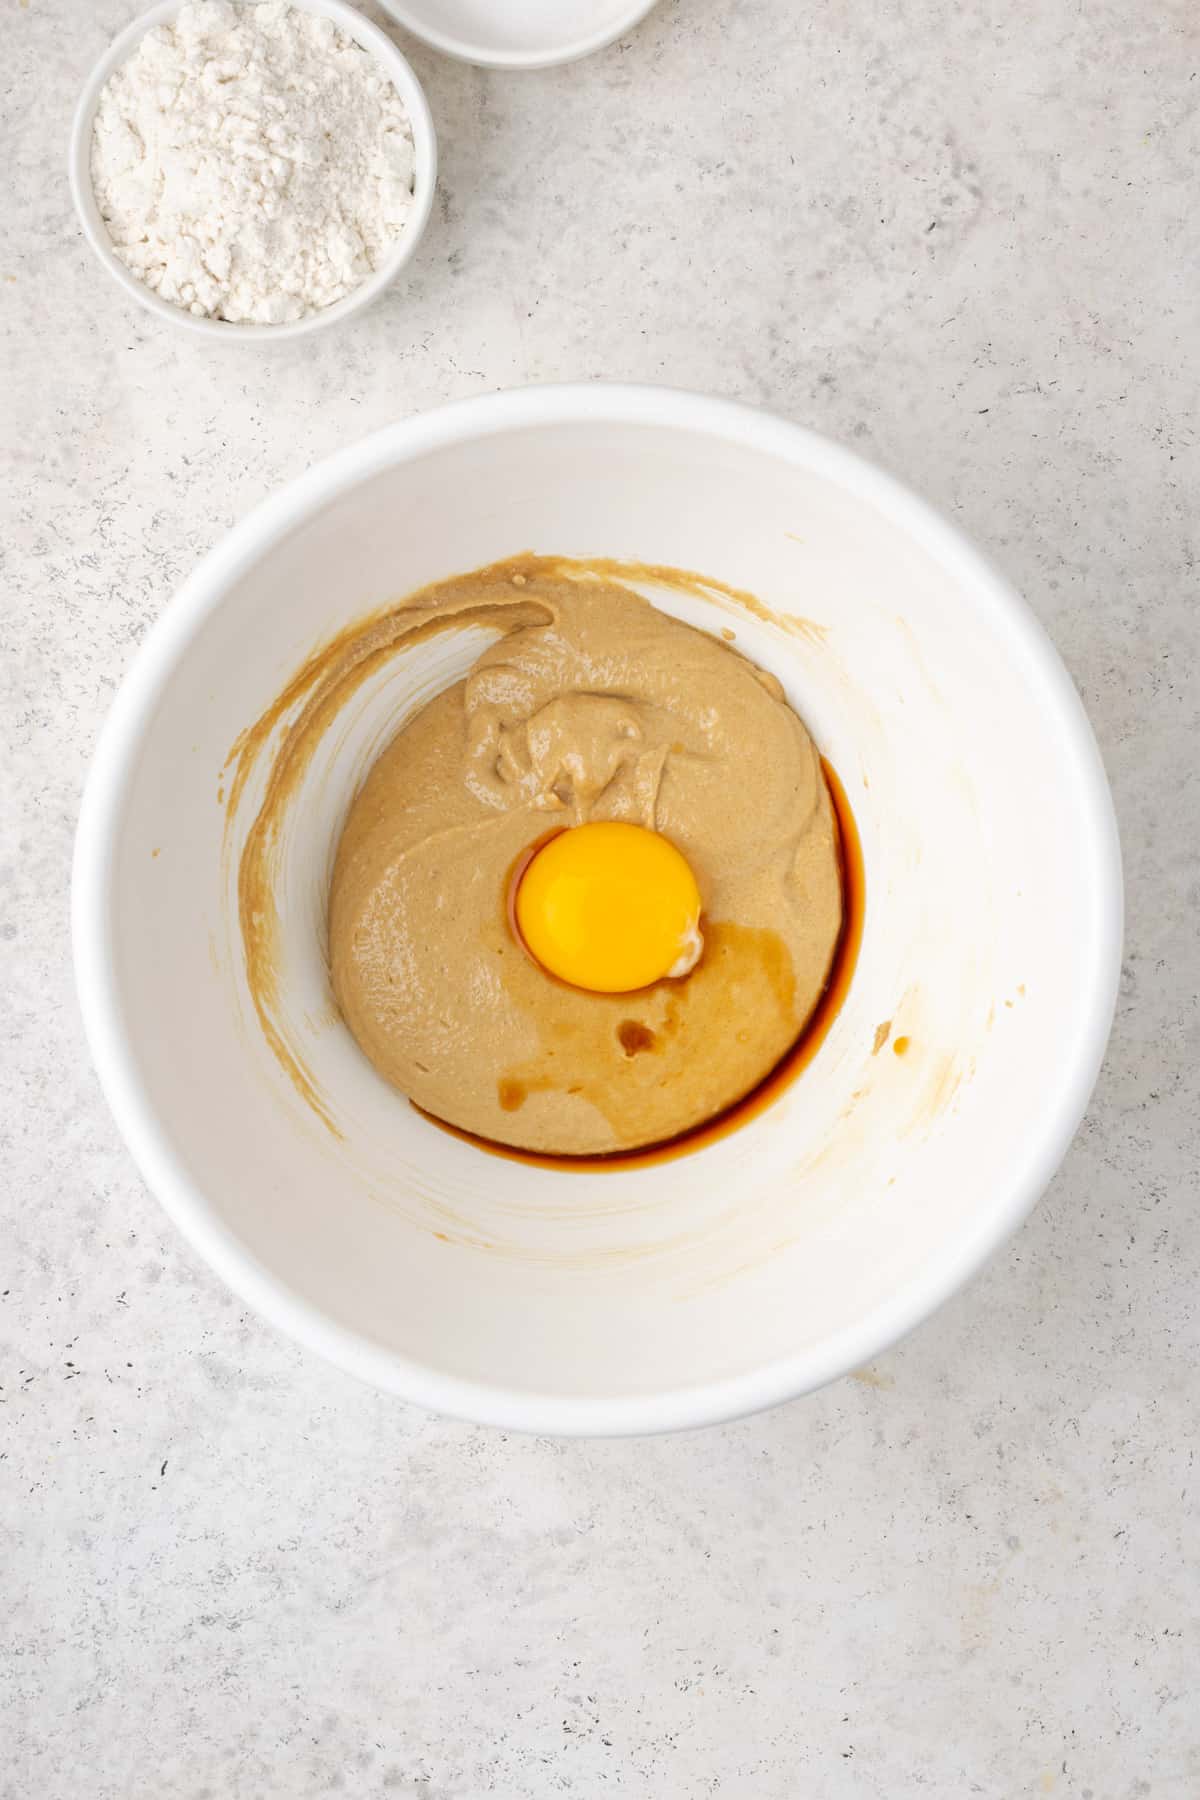 Egg yolk and vanilla extract added to the partially mixed peanut butter cookie dough.